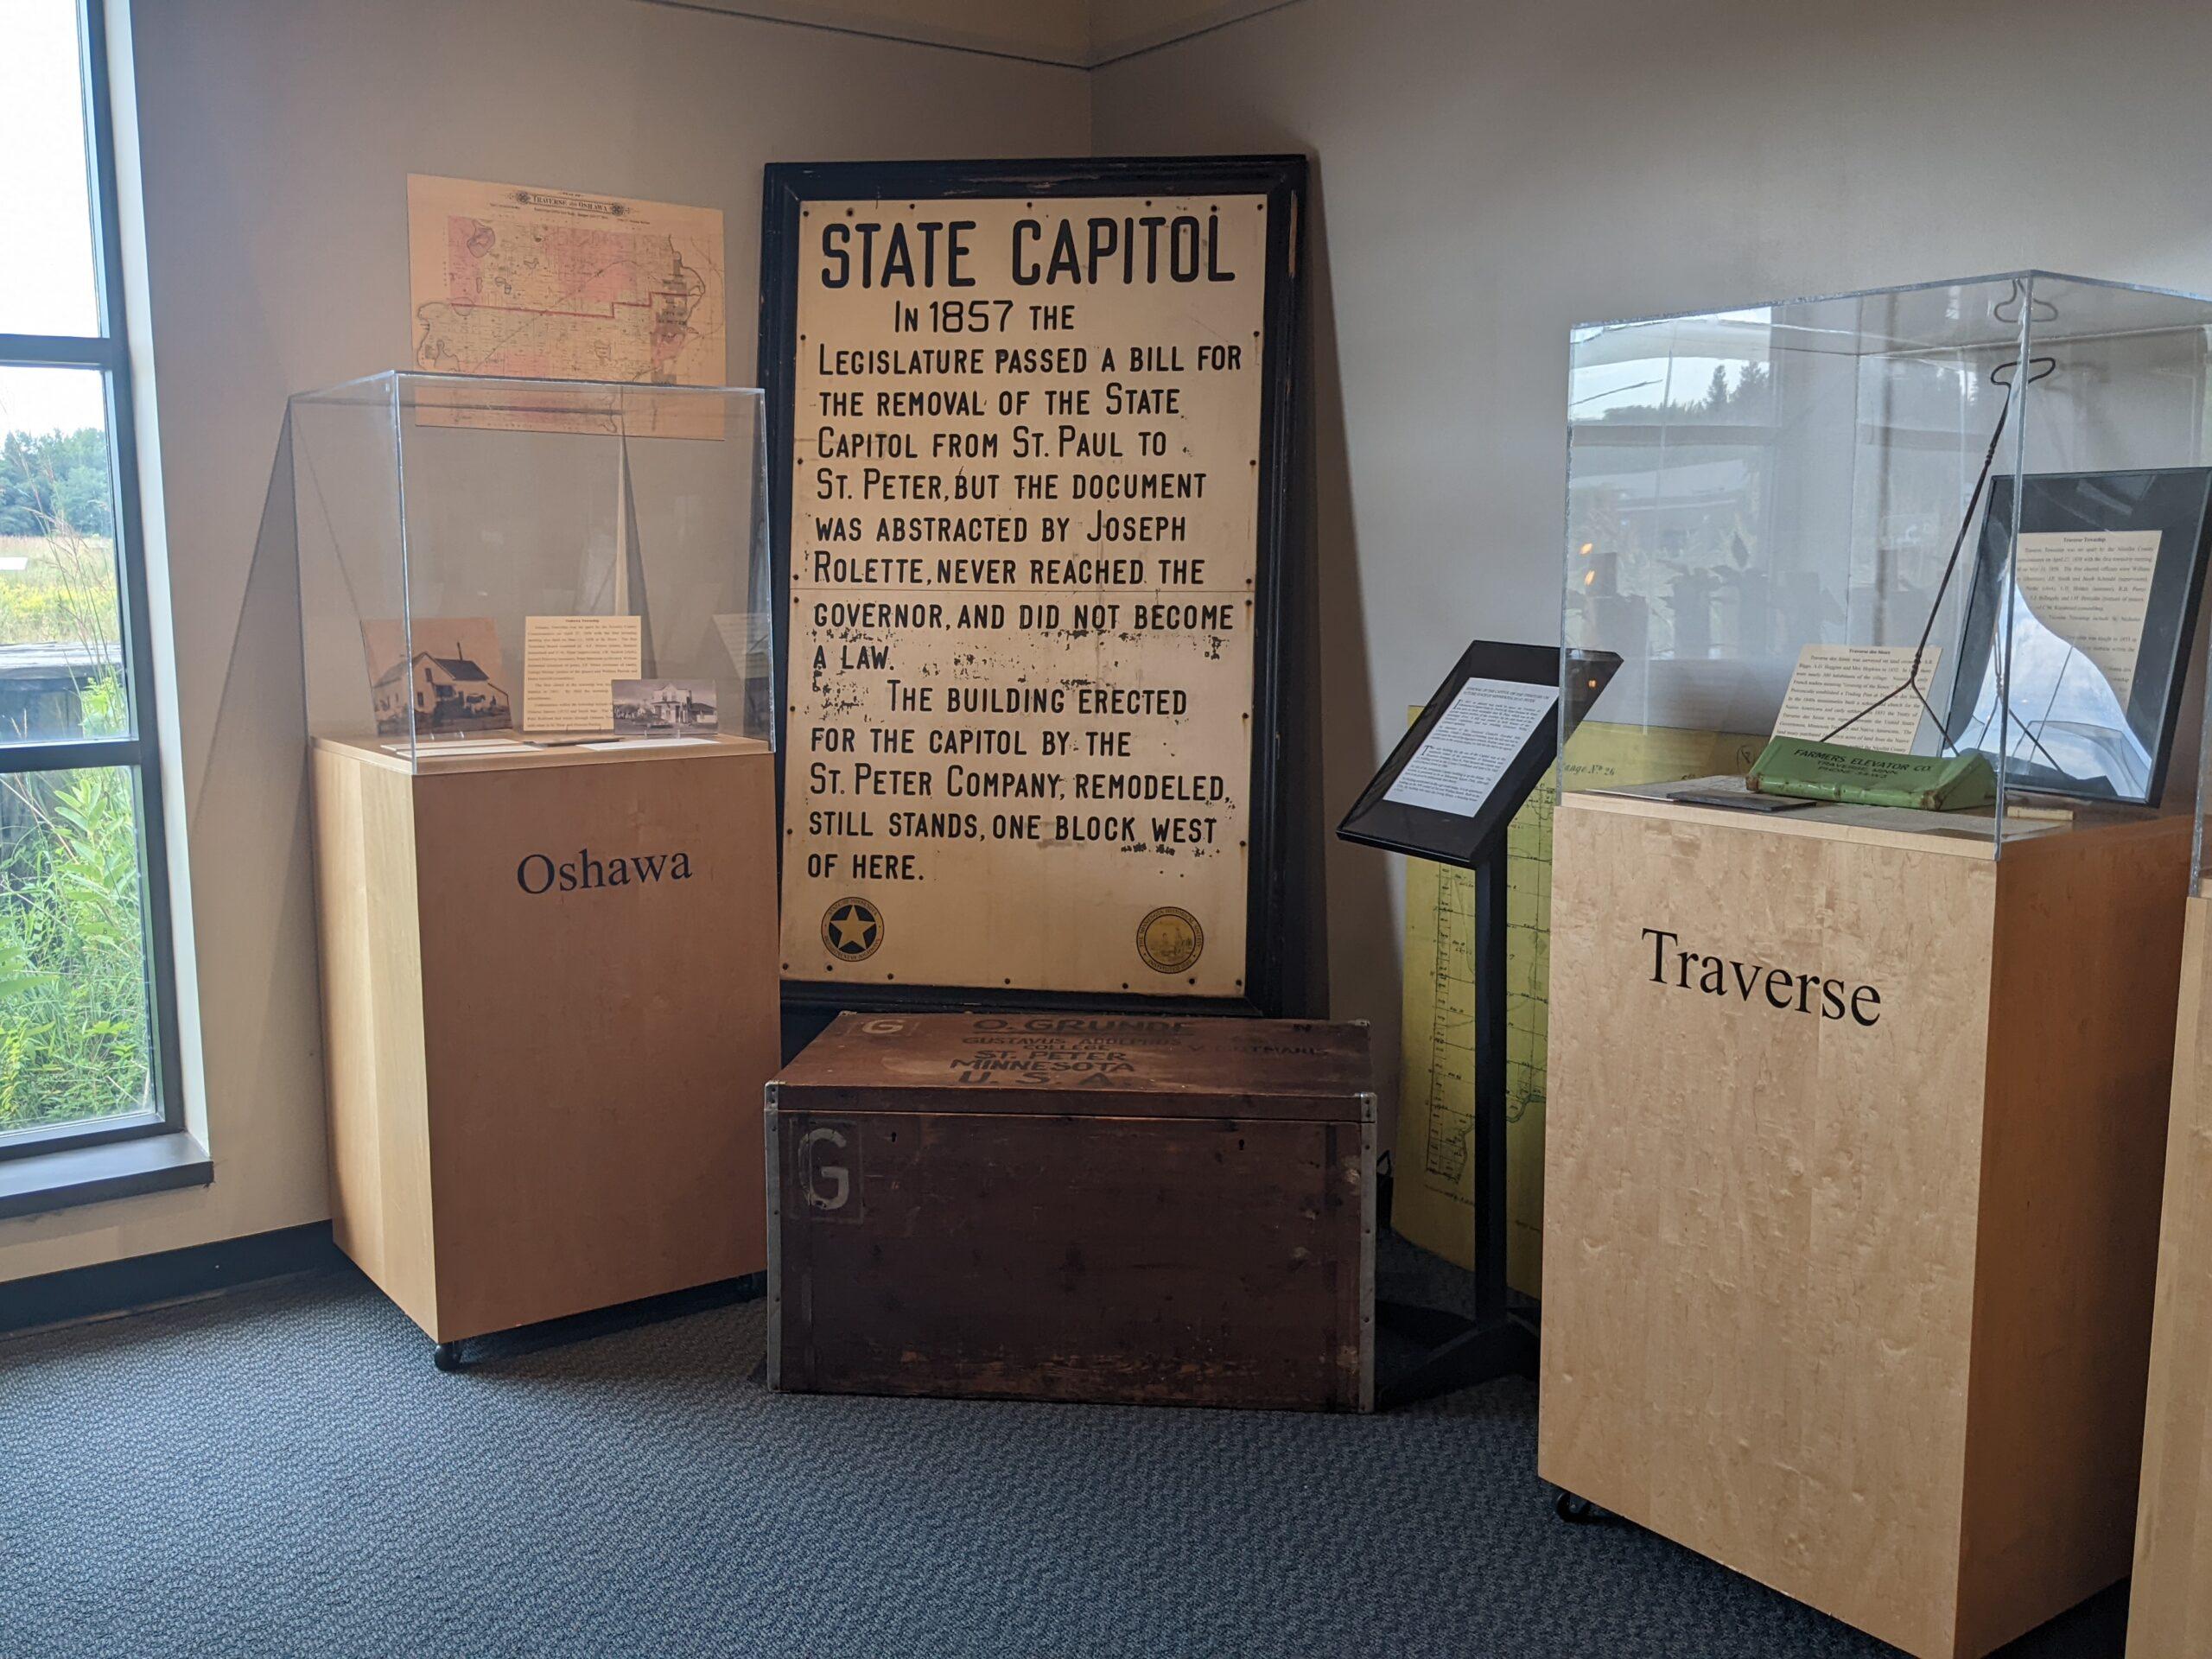 Historical exhibit on the 1857 State Capitol removal, featuring informational displays and artifacts, including old documents under glass cases, in a museum-like setting with natural lighting.